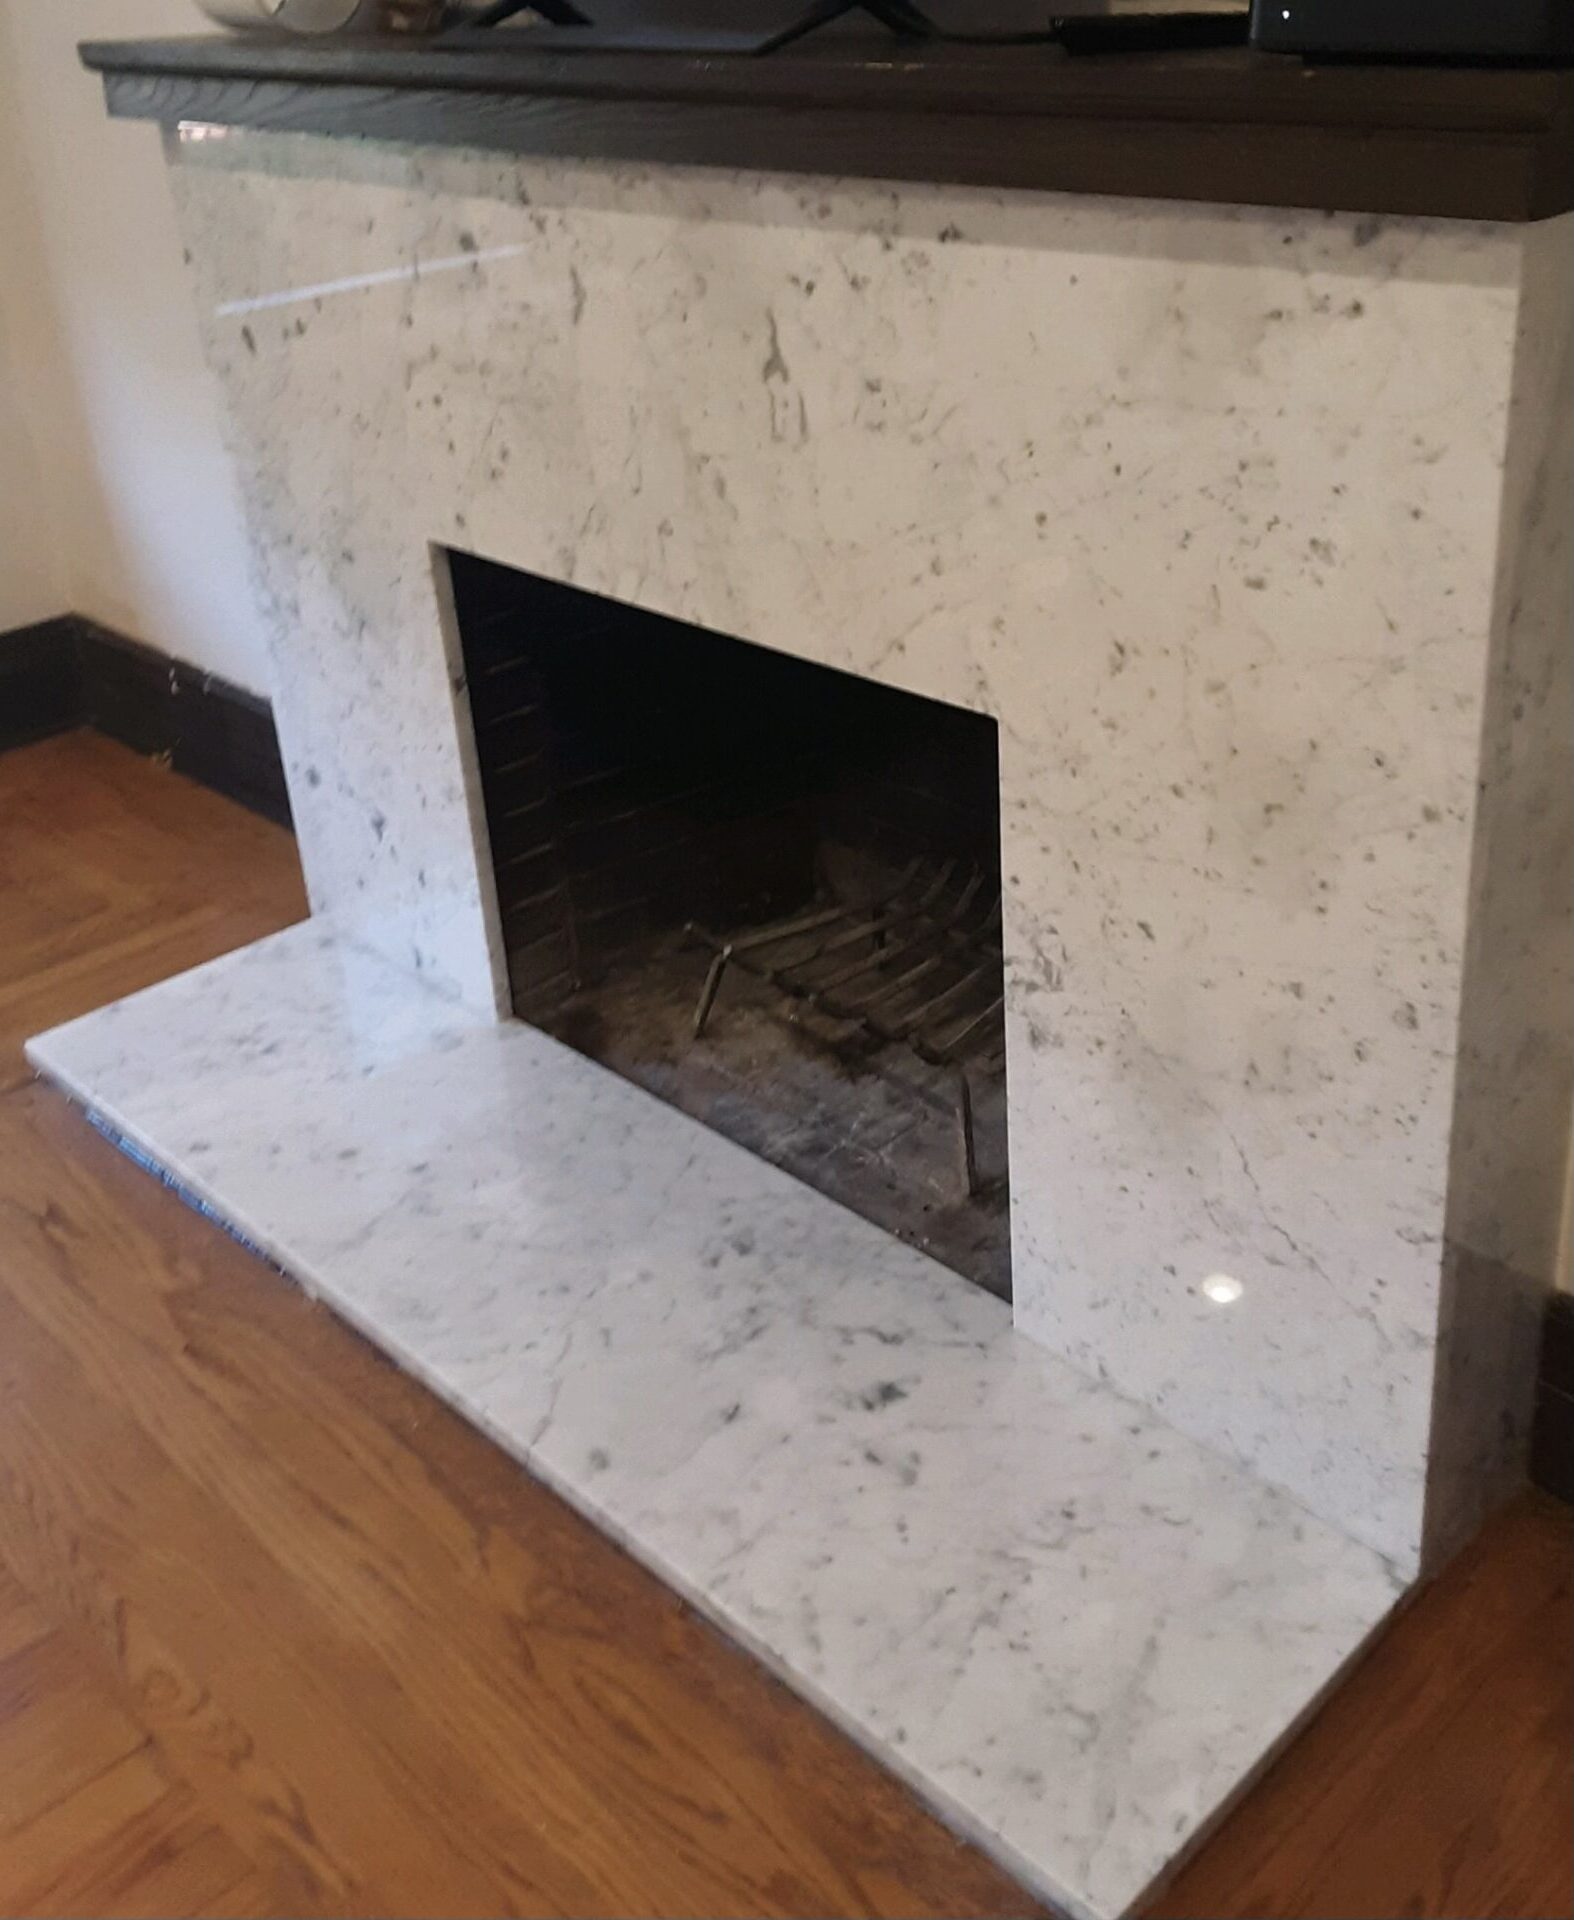 A fireplace with marble surround and hearth in the corner.